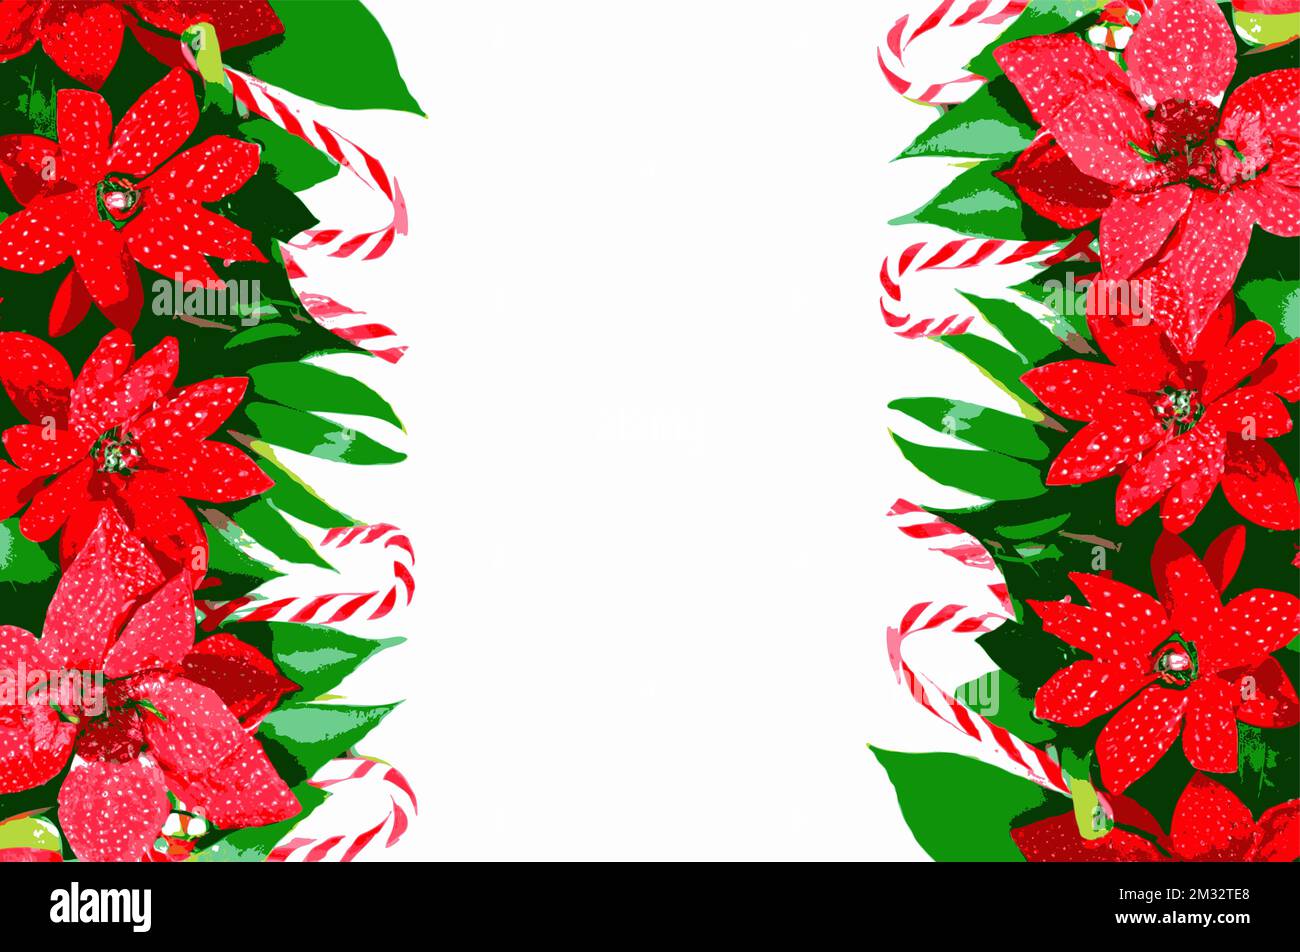 Poinsettia and candy cane background with copy space. Holiday and Christmas seasonal illustration copy space in the center. Stock Vector